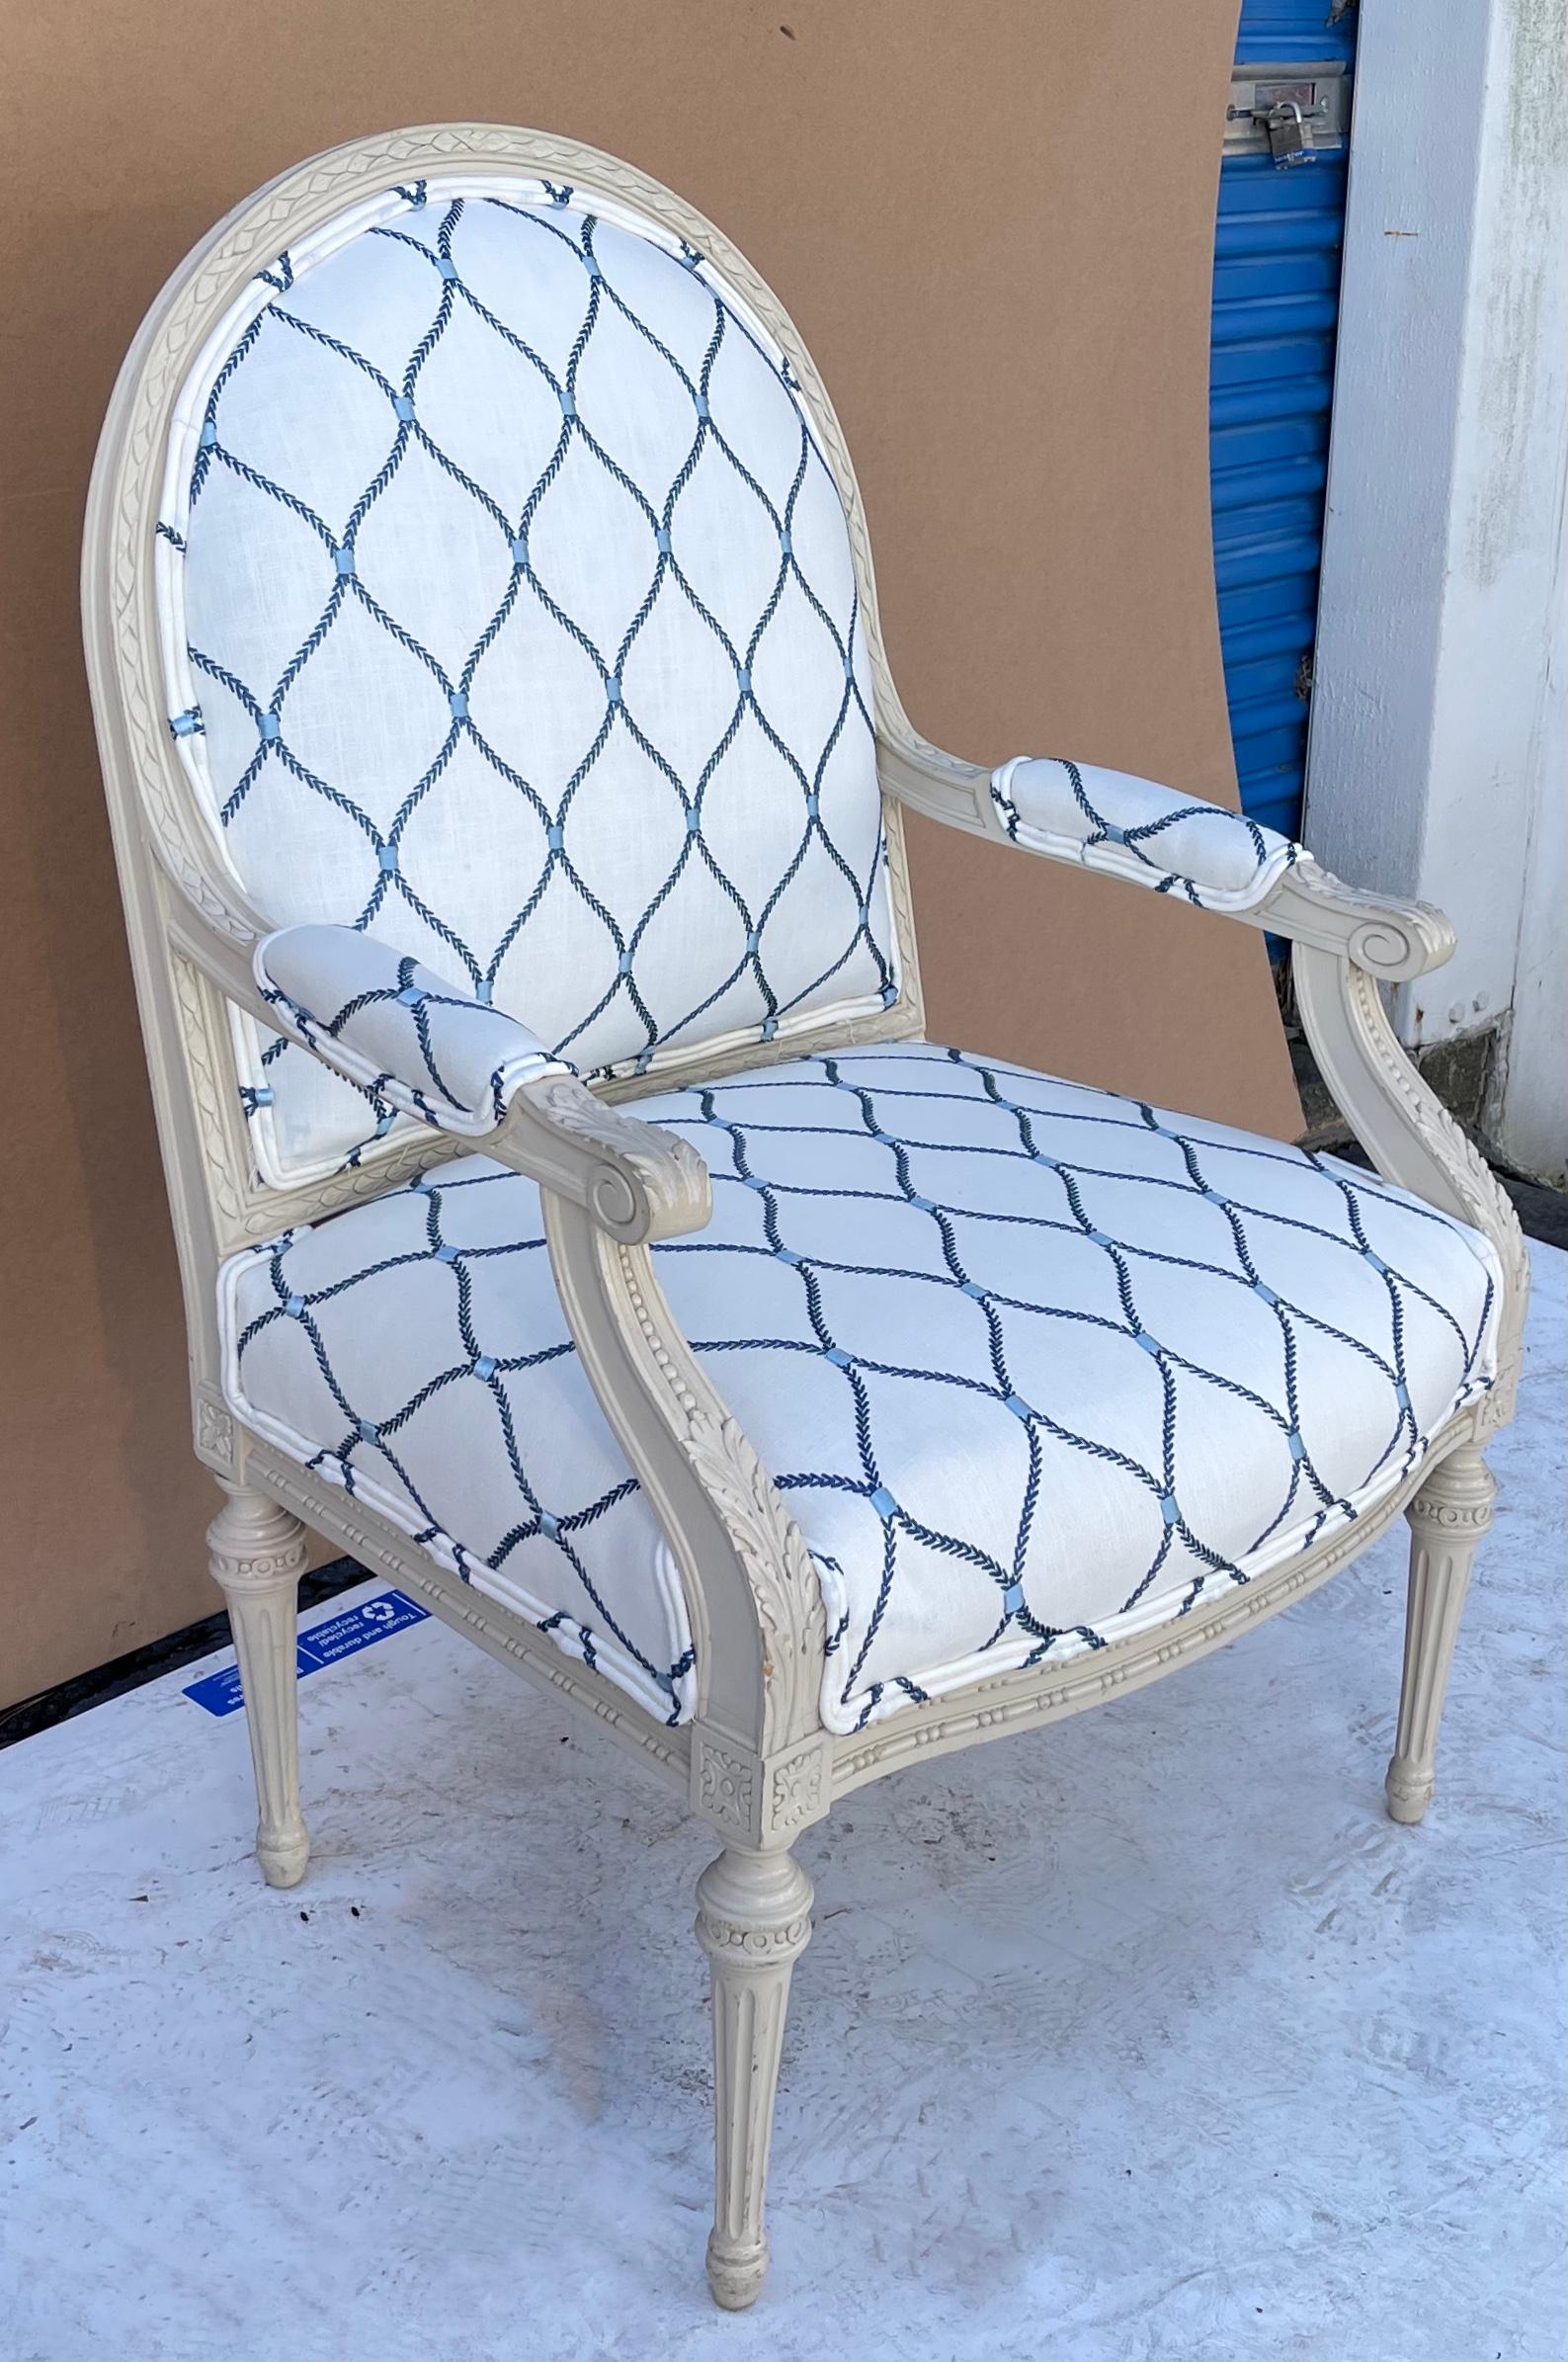 20th Century Carved French Style Chairs In Blue And White Travers Fabric, Pair In Good Condition For Sale In Kennesaw, GA